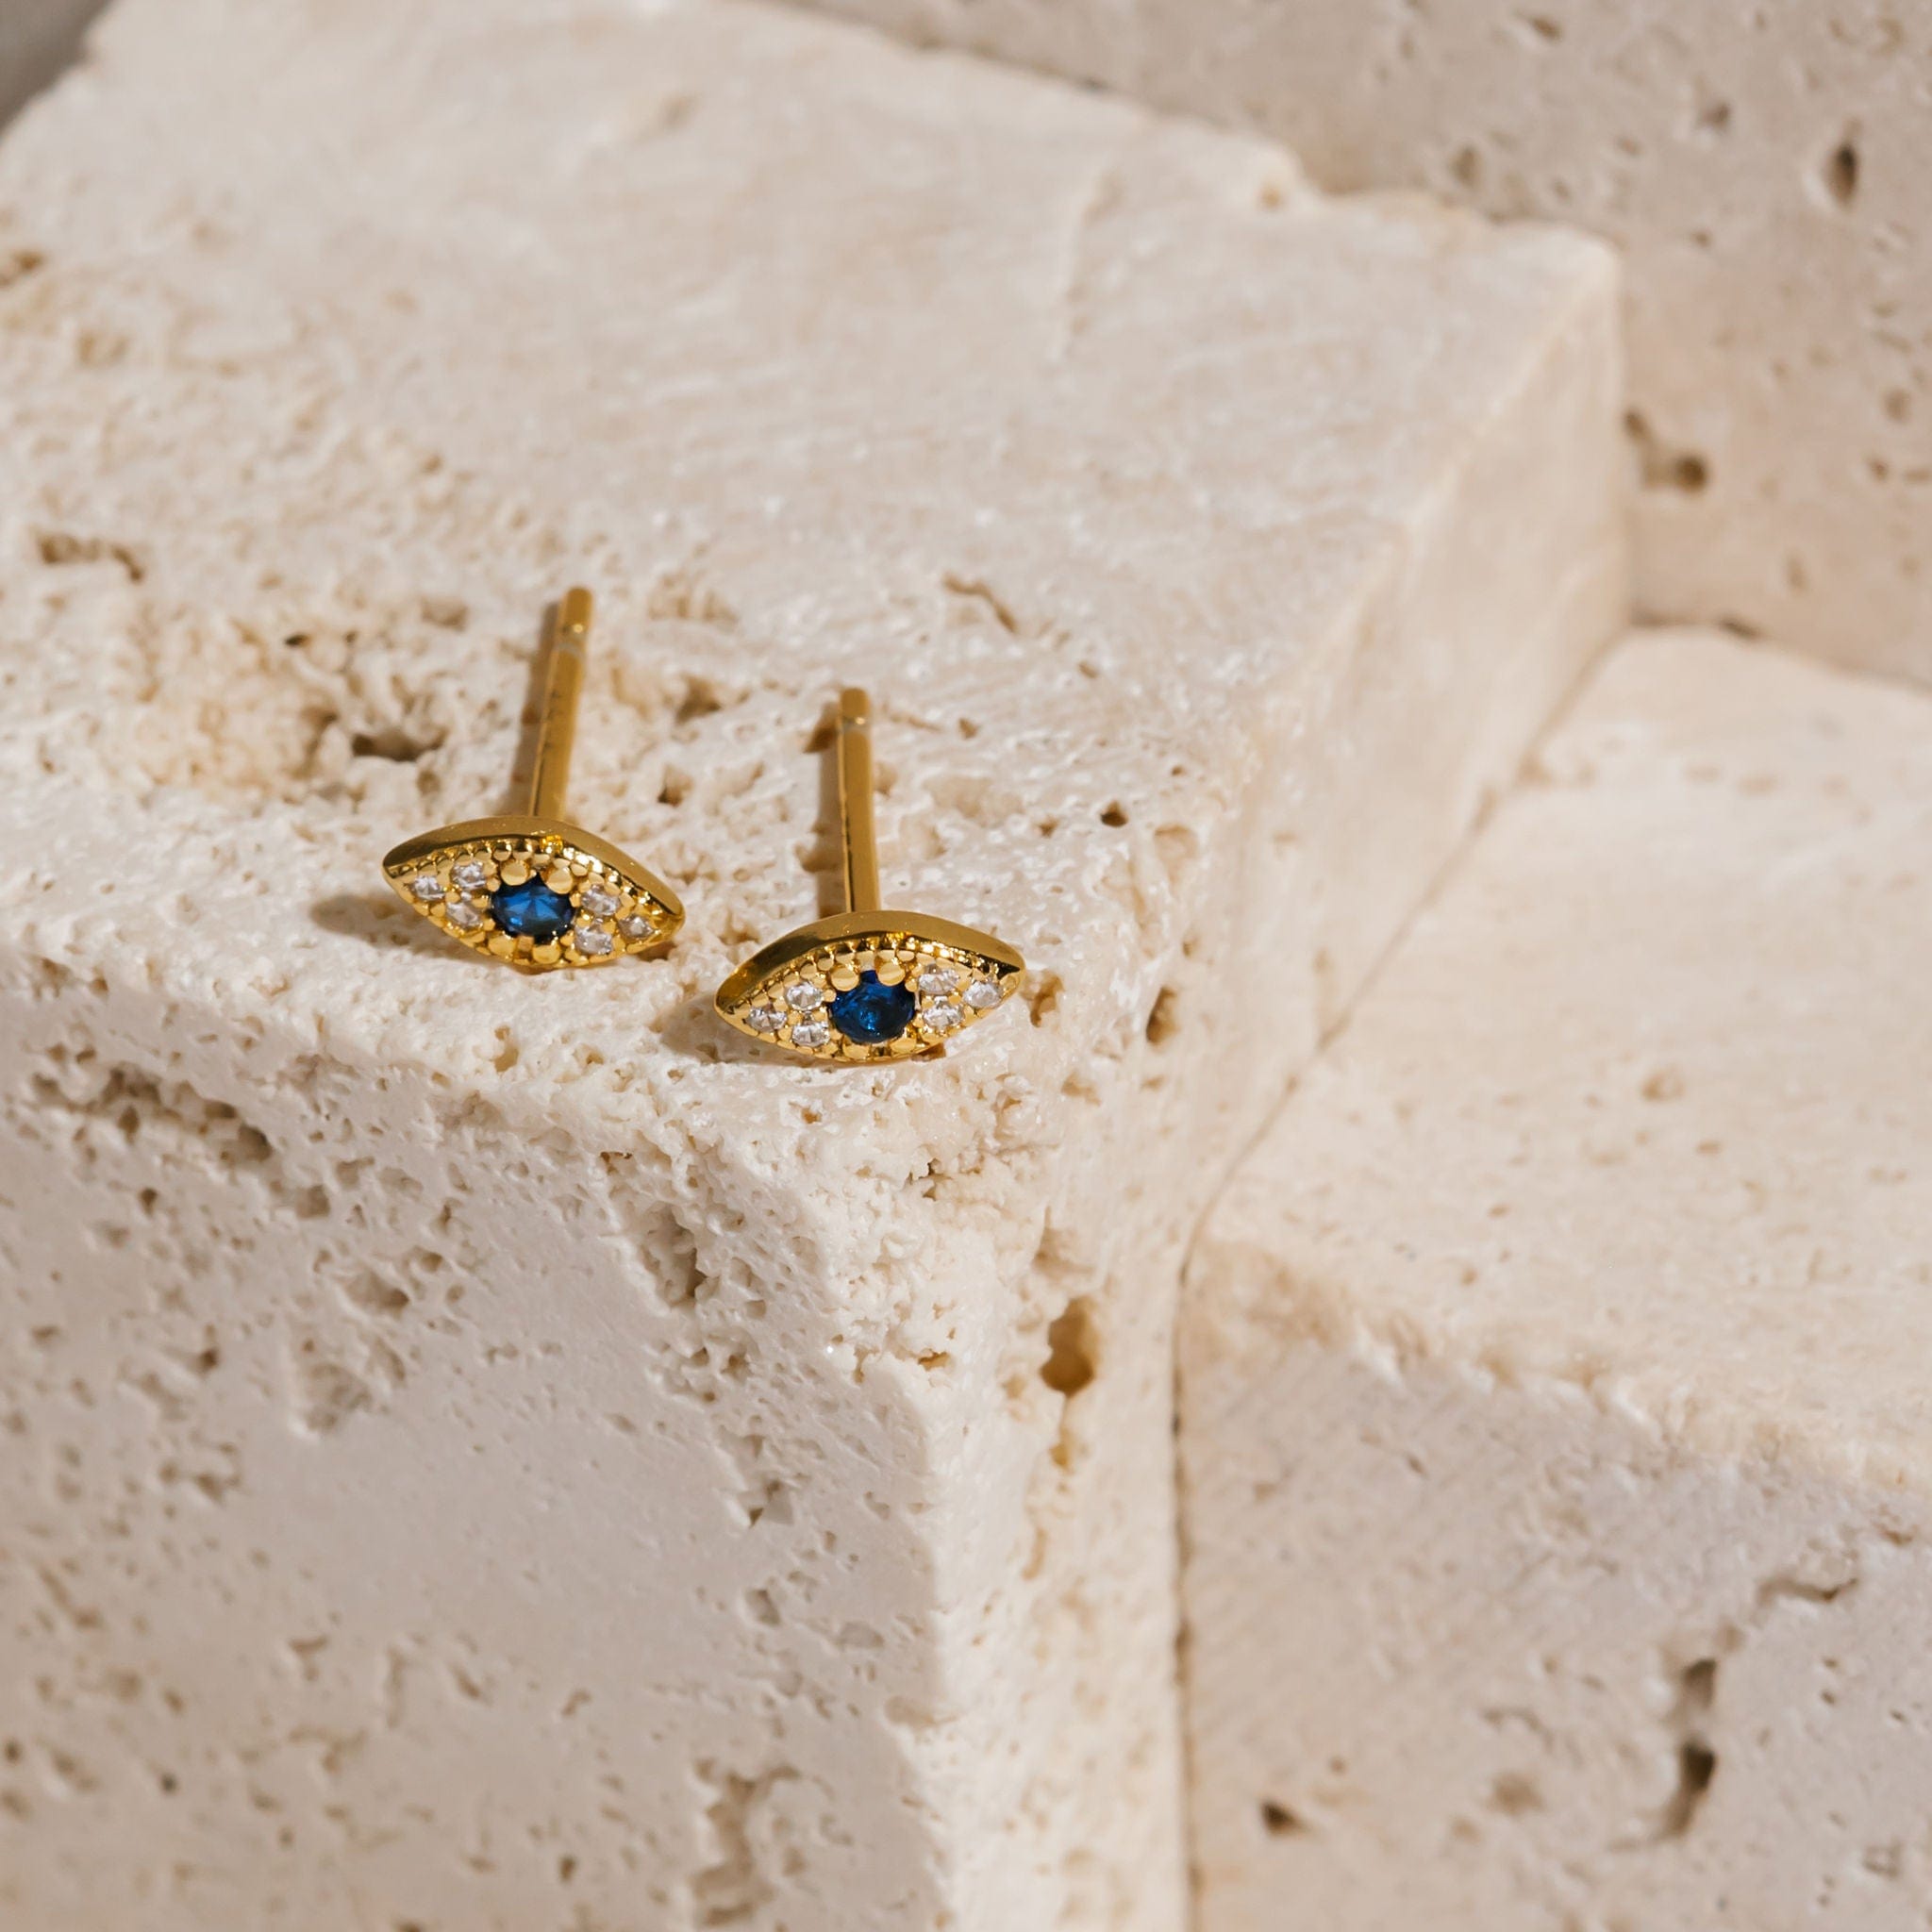 A pair of mini Evil Eye Cristallo Stud earrings lay side by side on a porous stone block, the golden texture of the earring highlighted amid the crystal and sapphire accents. 